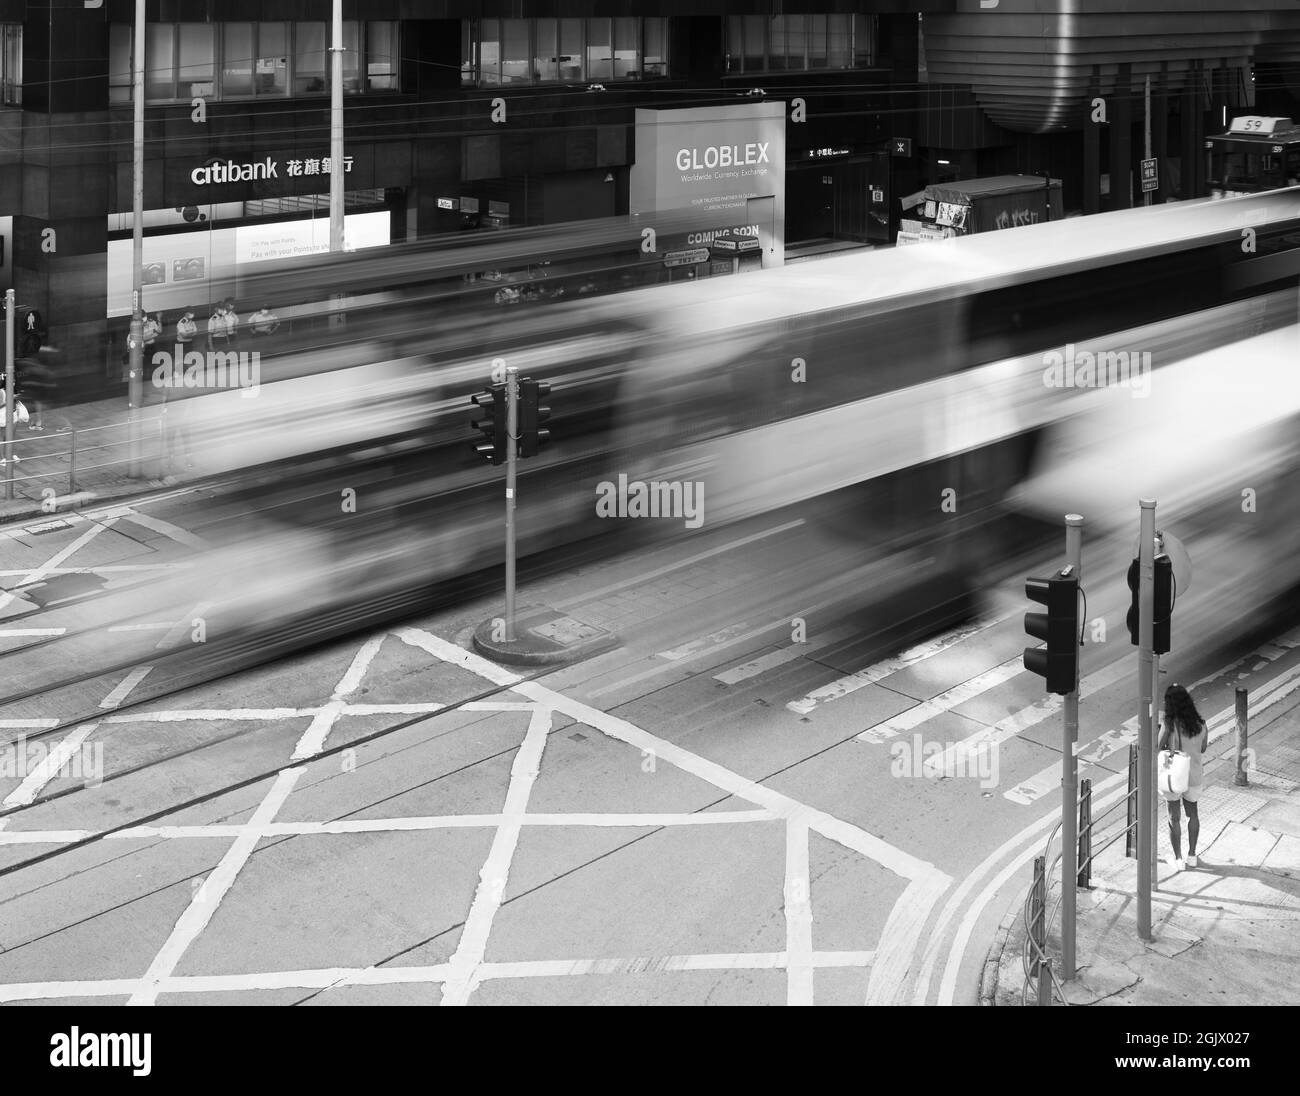 Person waiting to cross a road.  Long exposure gives blurred images of vehicles in Central, Hong Kong. Stock Photo